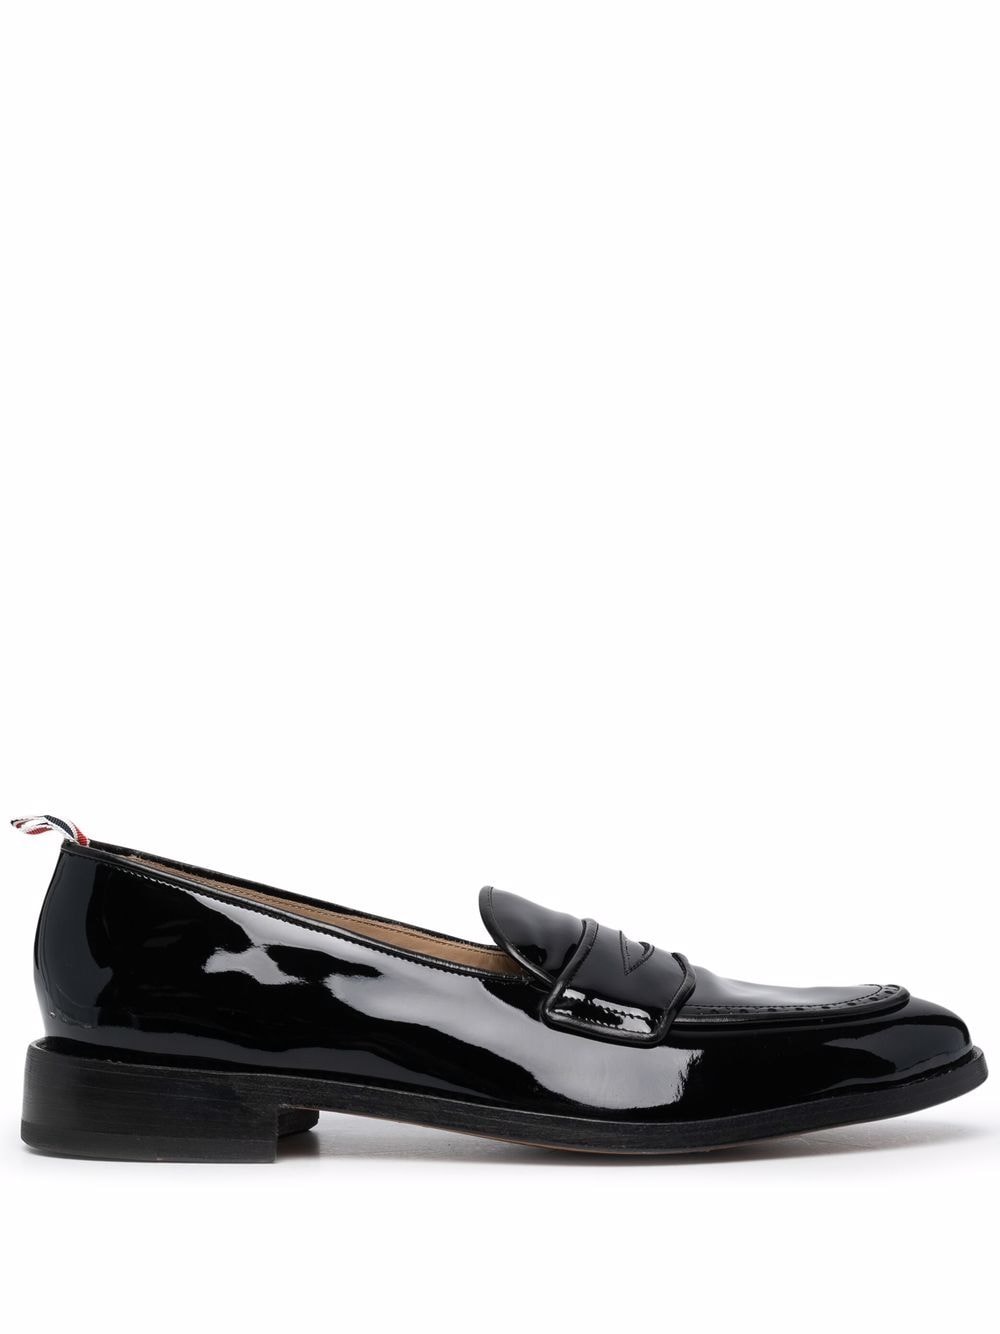 Thom Browne Patent Leather Penny Loafers - Black